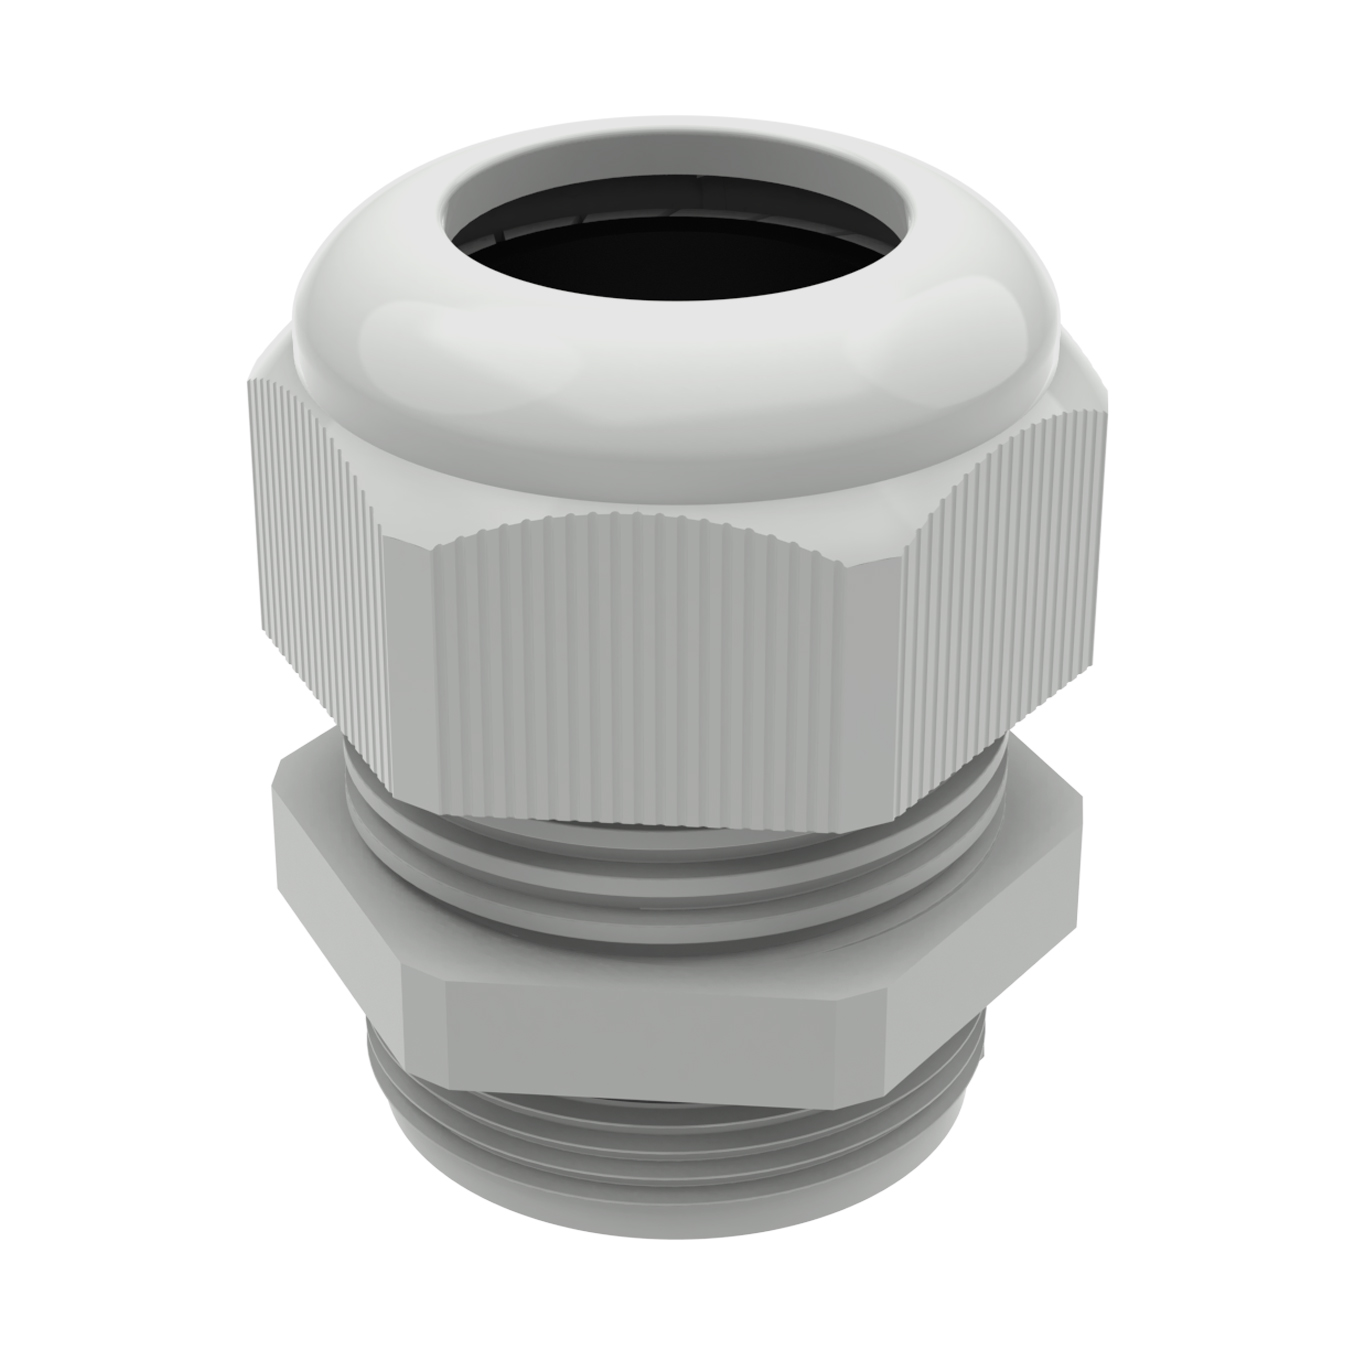 This part is a 100% waterproof cable gland (IP68 - 5 bar). Its design gives the possibility to fit several cable diameters with secure protection and fastening. It can be supplied with a plug protector, and an O-ring PRP for watertightness and an adapter joint PRTI for several cables. Also, you can find the corresponding lock nut: PRTUE. Please contact us for more information.